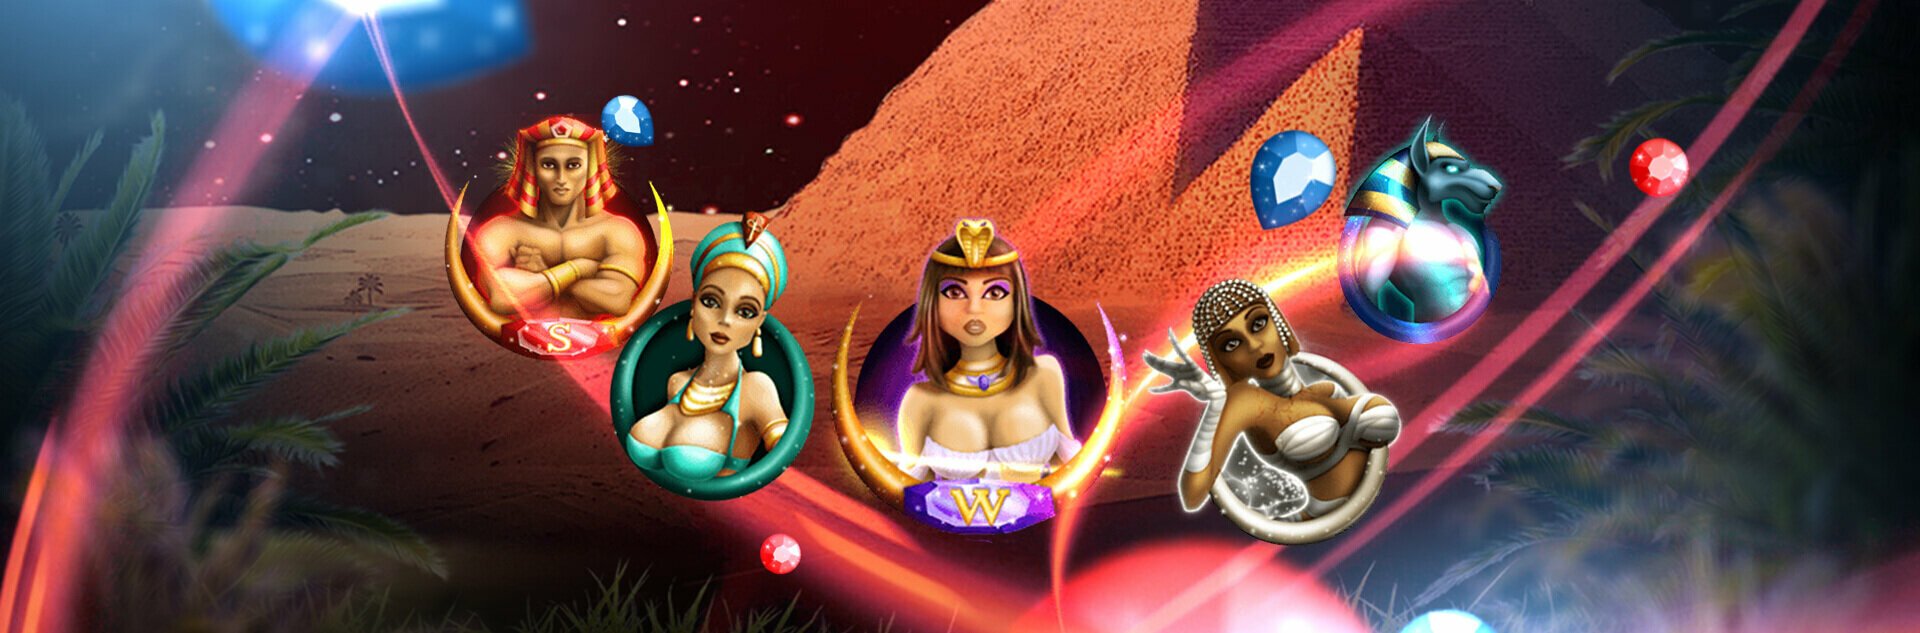 Valley of Pharaohs Free Spins